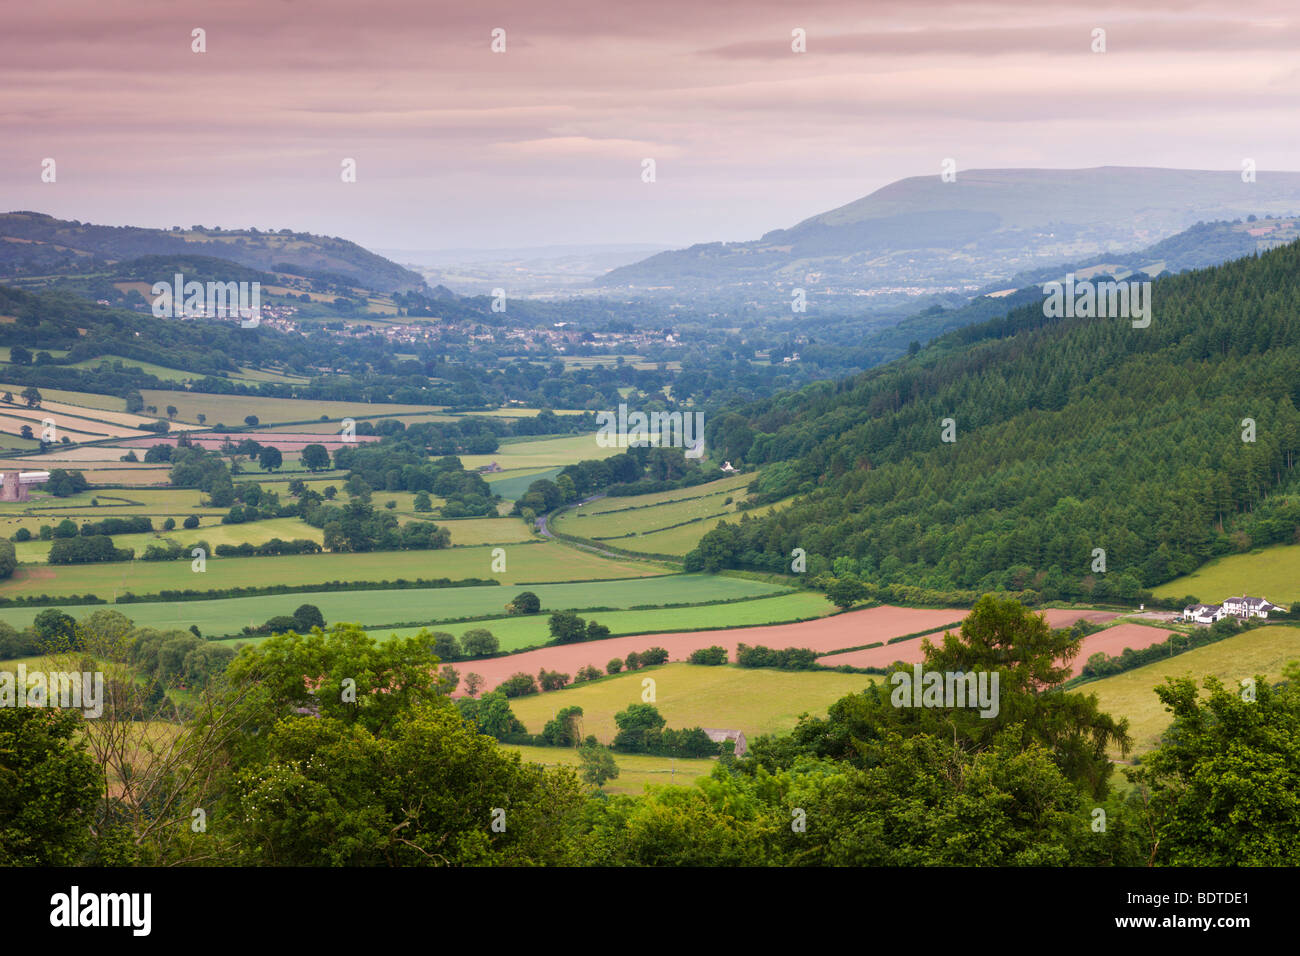 Rolling countryside in the Usk Valley looking towards Crickhowell, Brecon Beacons National Park, Powys, Wales Stock Photo